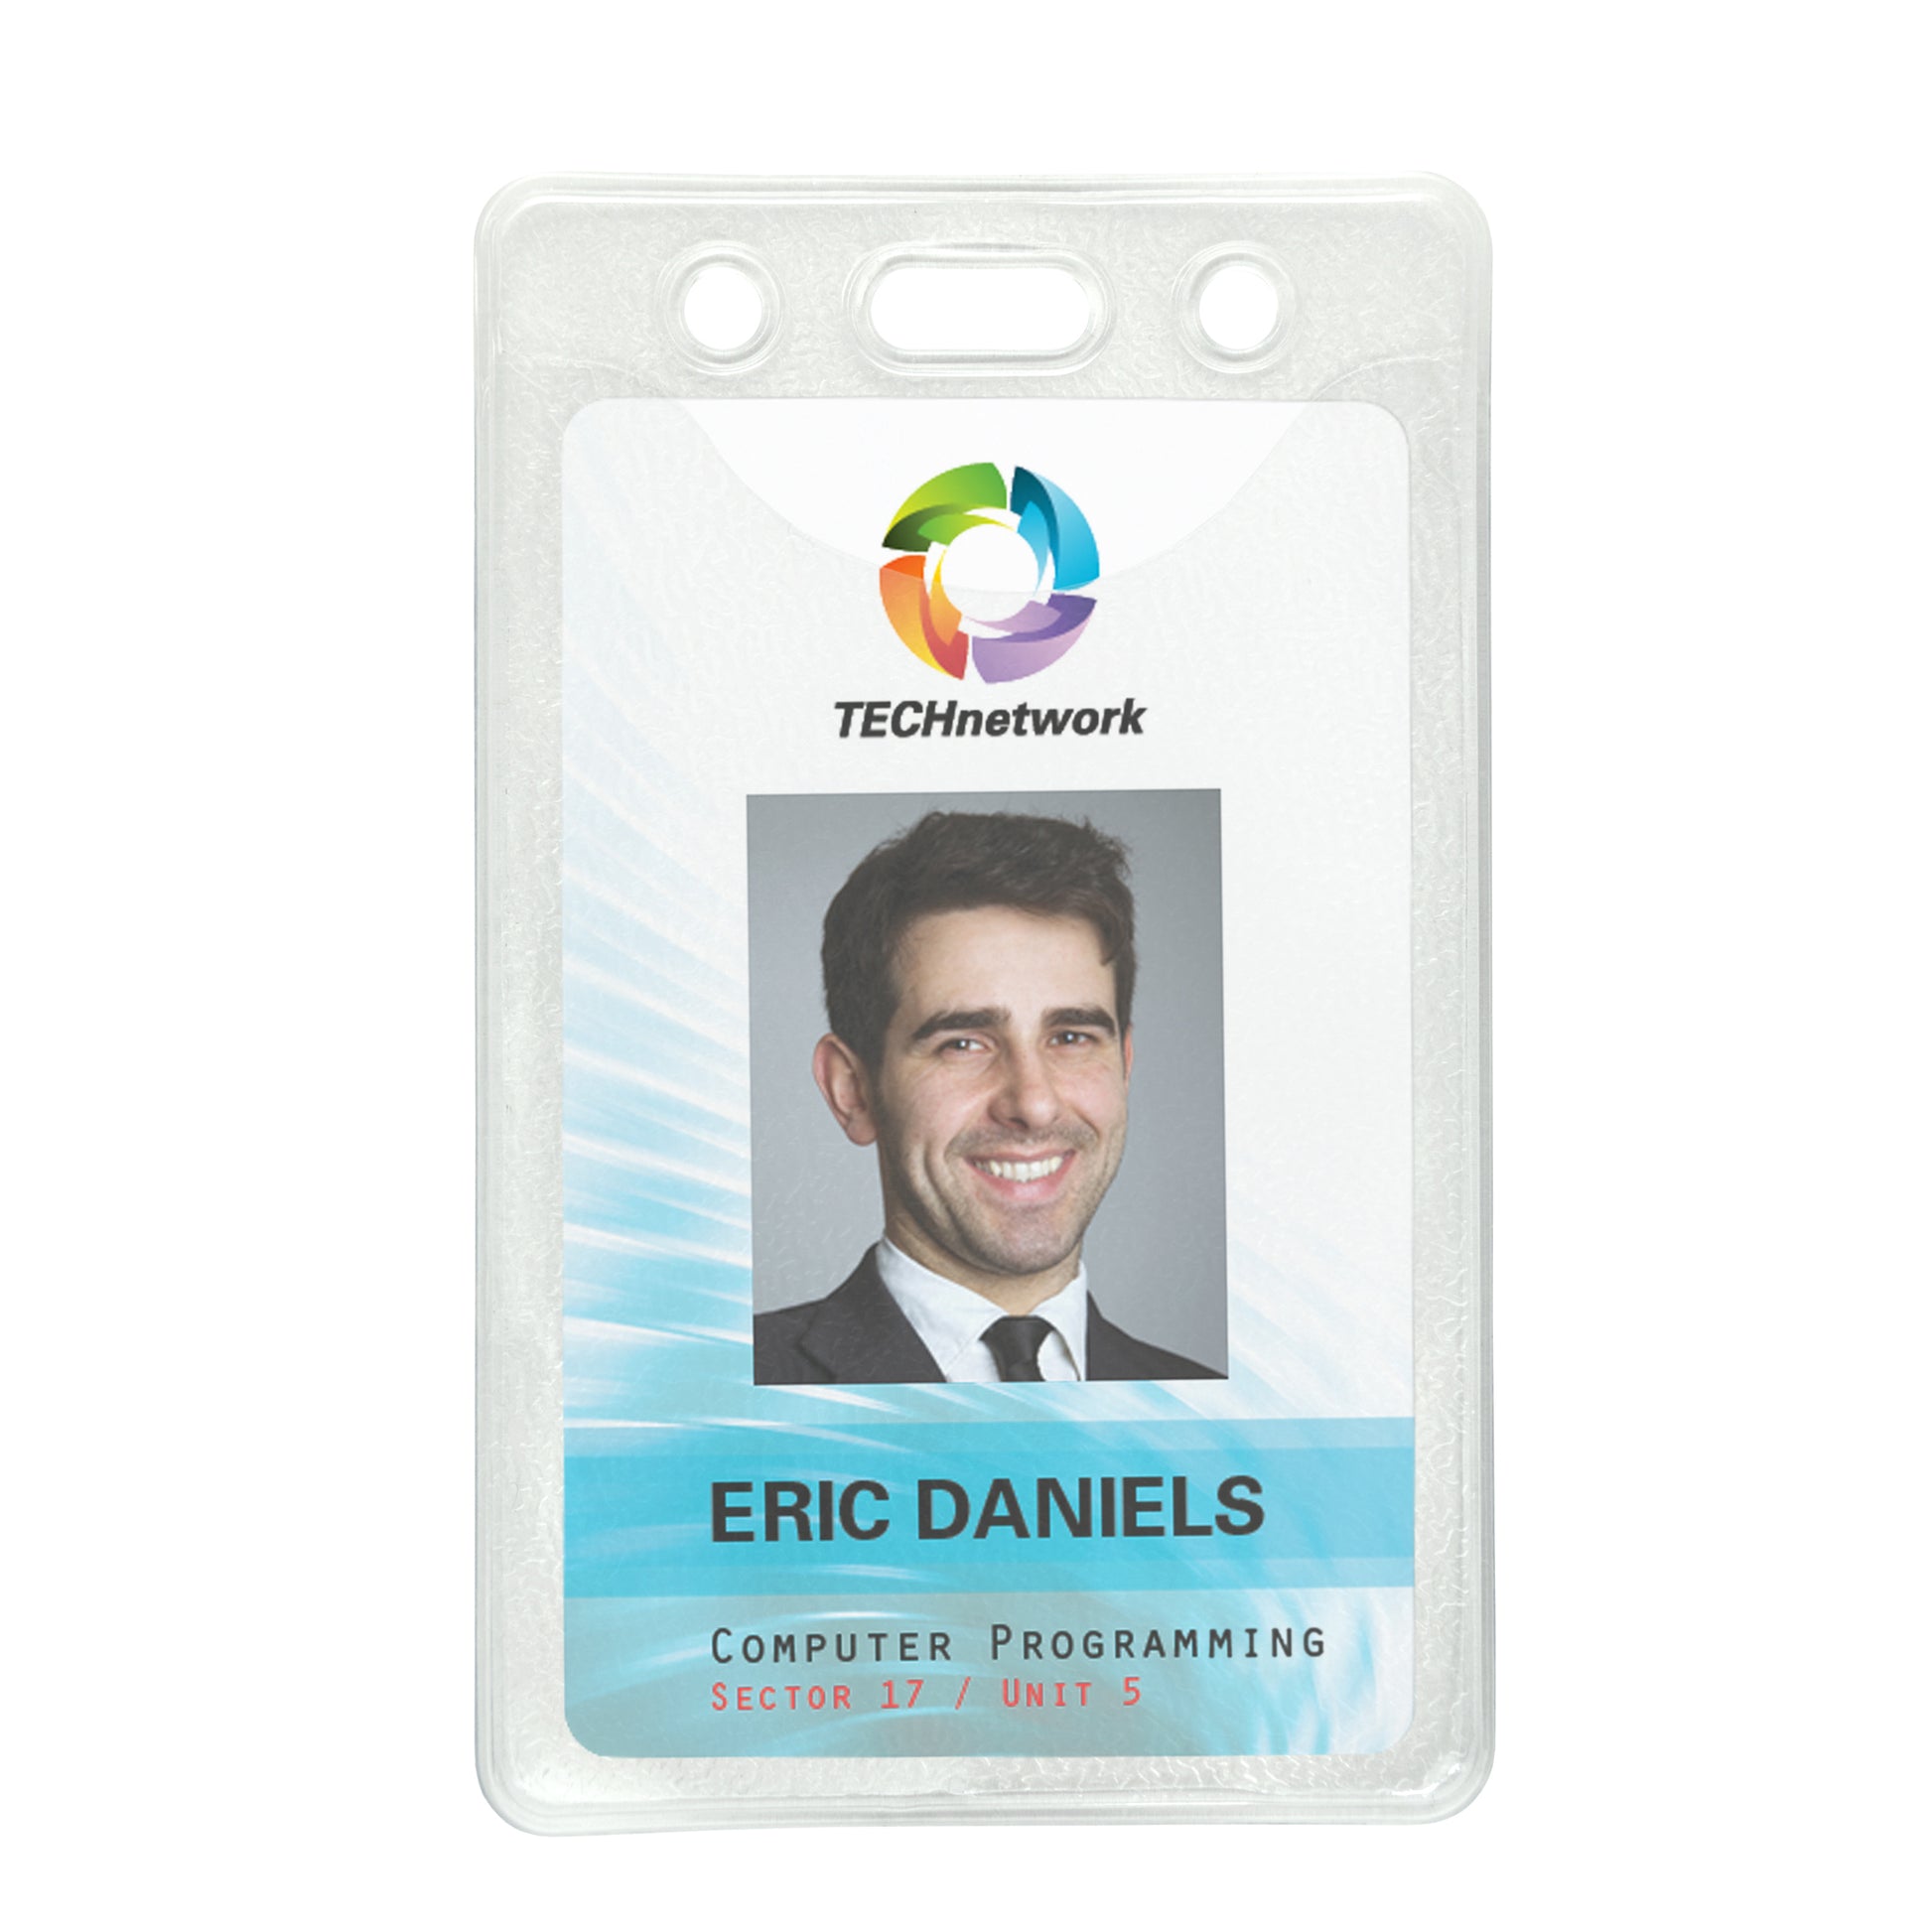 ID badge for Eric Daniels from TECHnetwork, Computer Programming, Sector 17, Unit 5, featuring a photo of a man in a suit and tie, housed in a Vertical Heavy Duty Vinyl ID Badge Holder with Reinforced Edges and Orange Peel Texture (1815-1100).